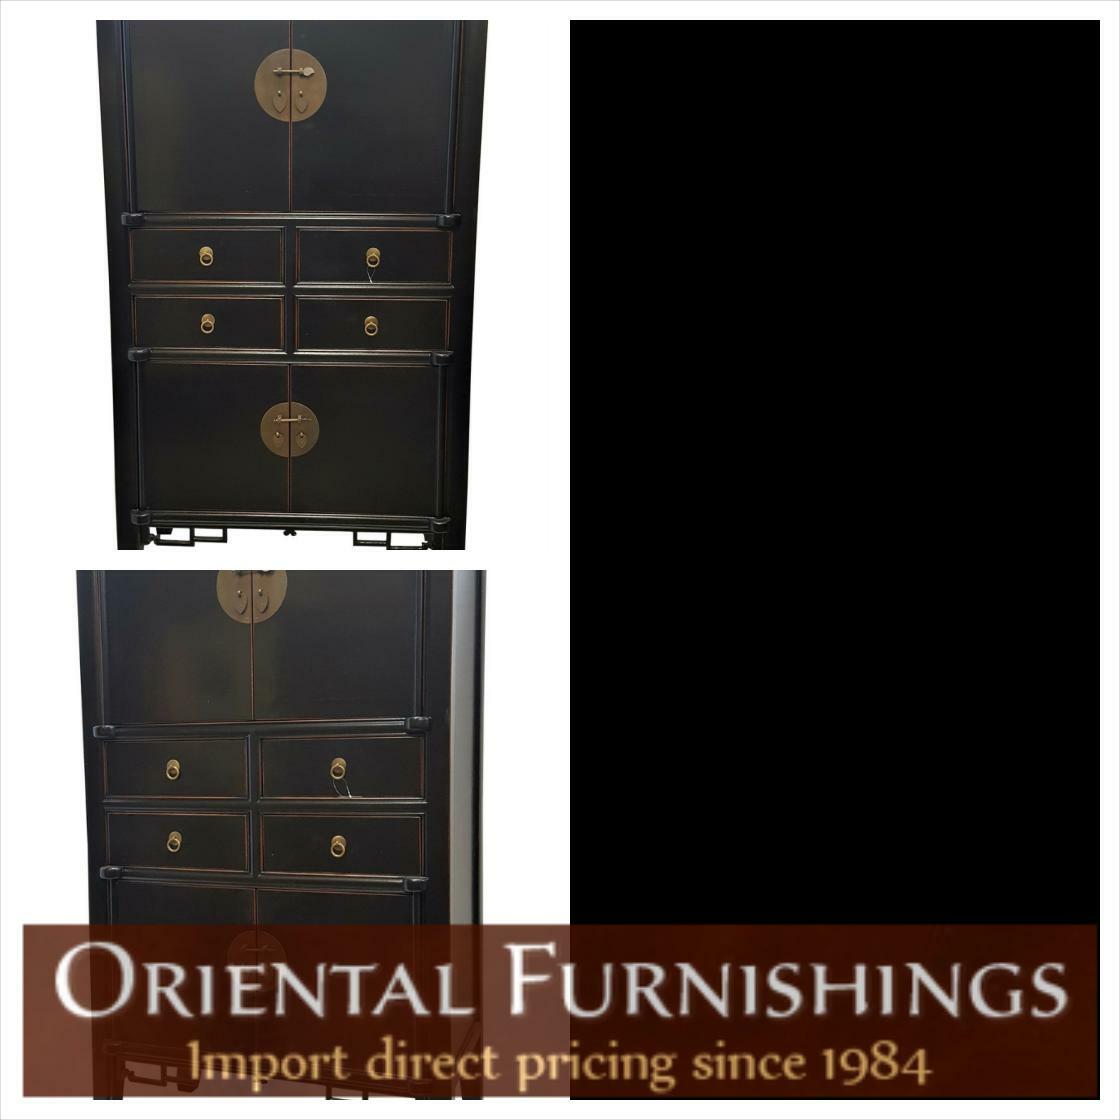 #asianfurniture Modern Cabinet with a Chinese Ming Design In Black and 59'H Seen here: bit.ly/3jCkMbD